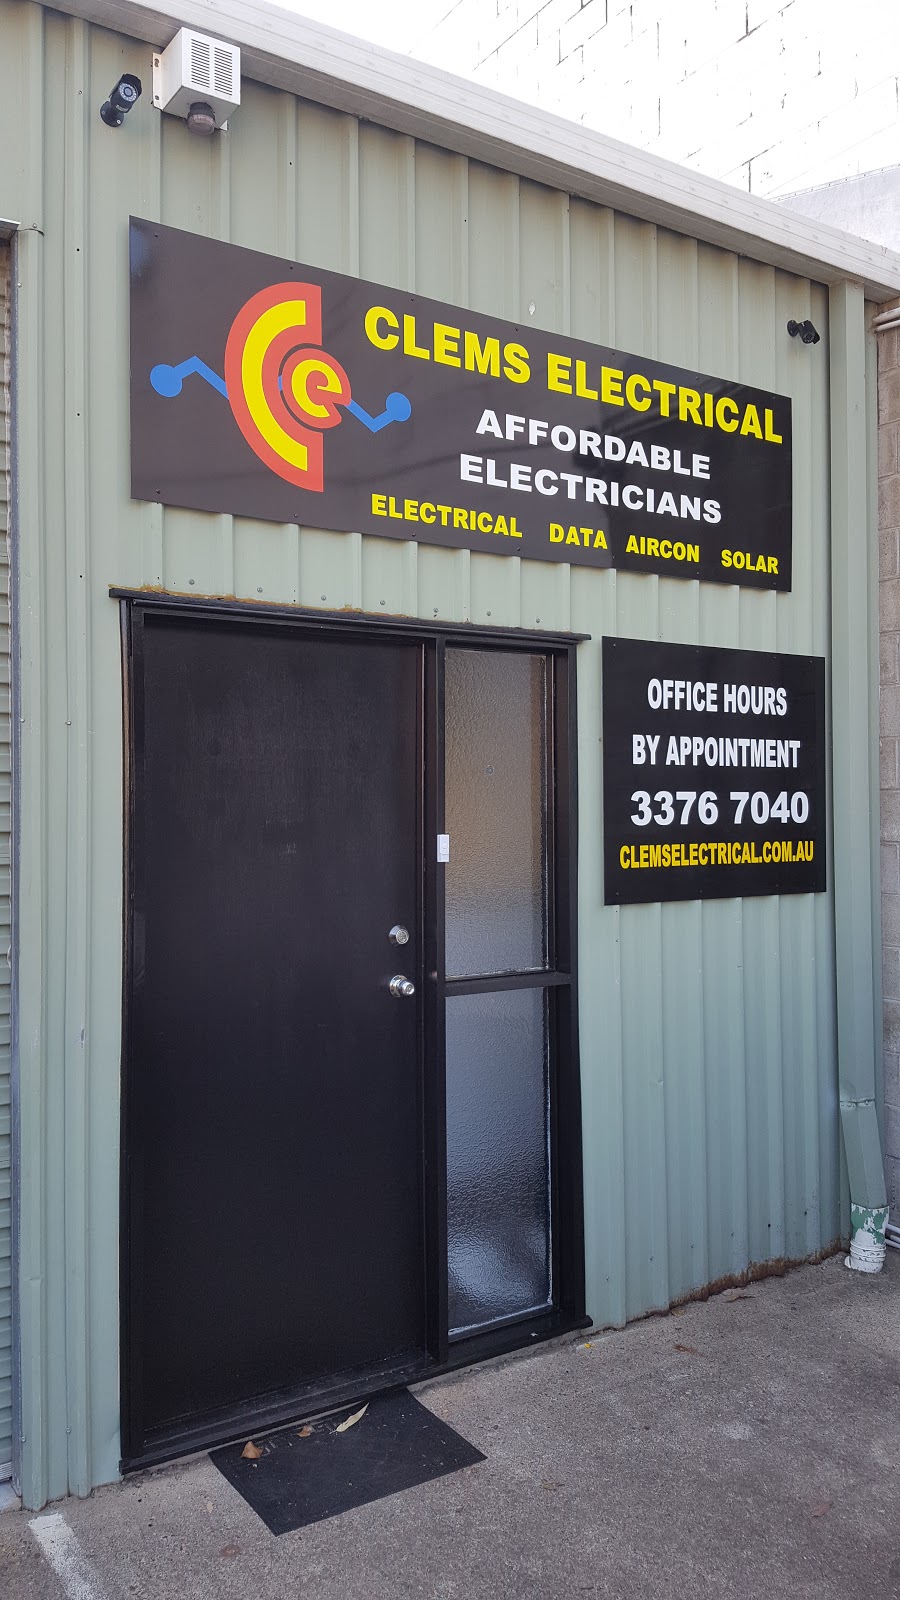 Clems Electrical - Affordable Electricians | electrician | 88 Riversleigh Rd, Bellbowrie QLD 4070, Australia | 0488781378 OR +61 488 781 378